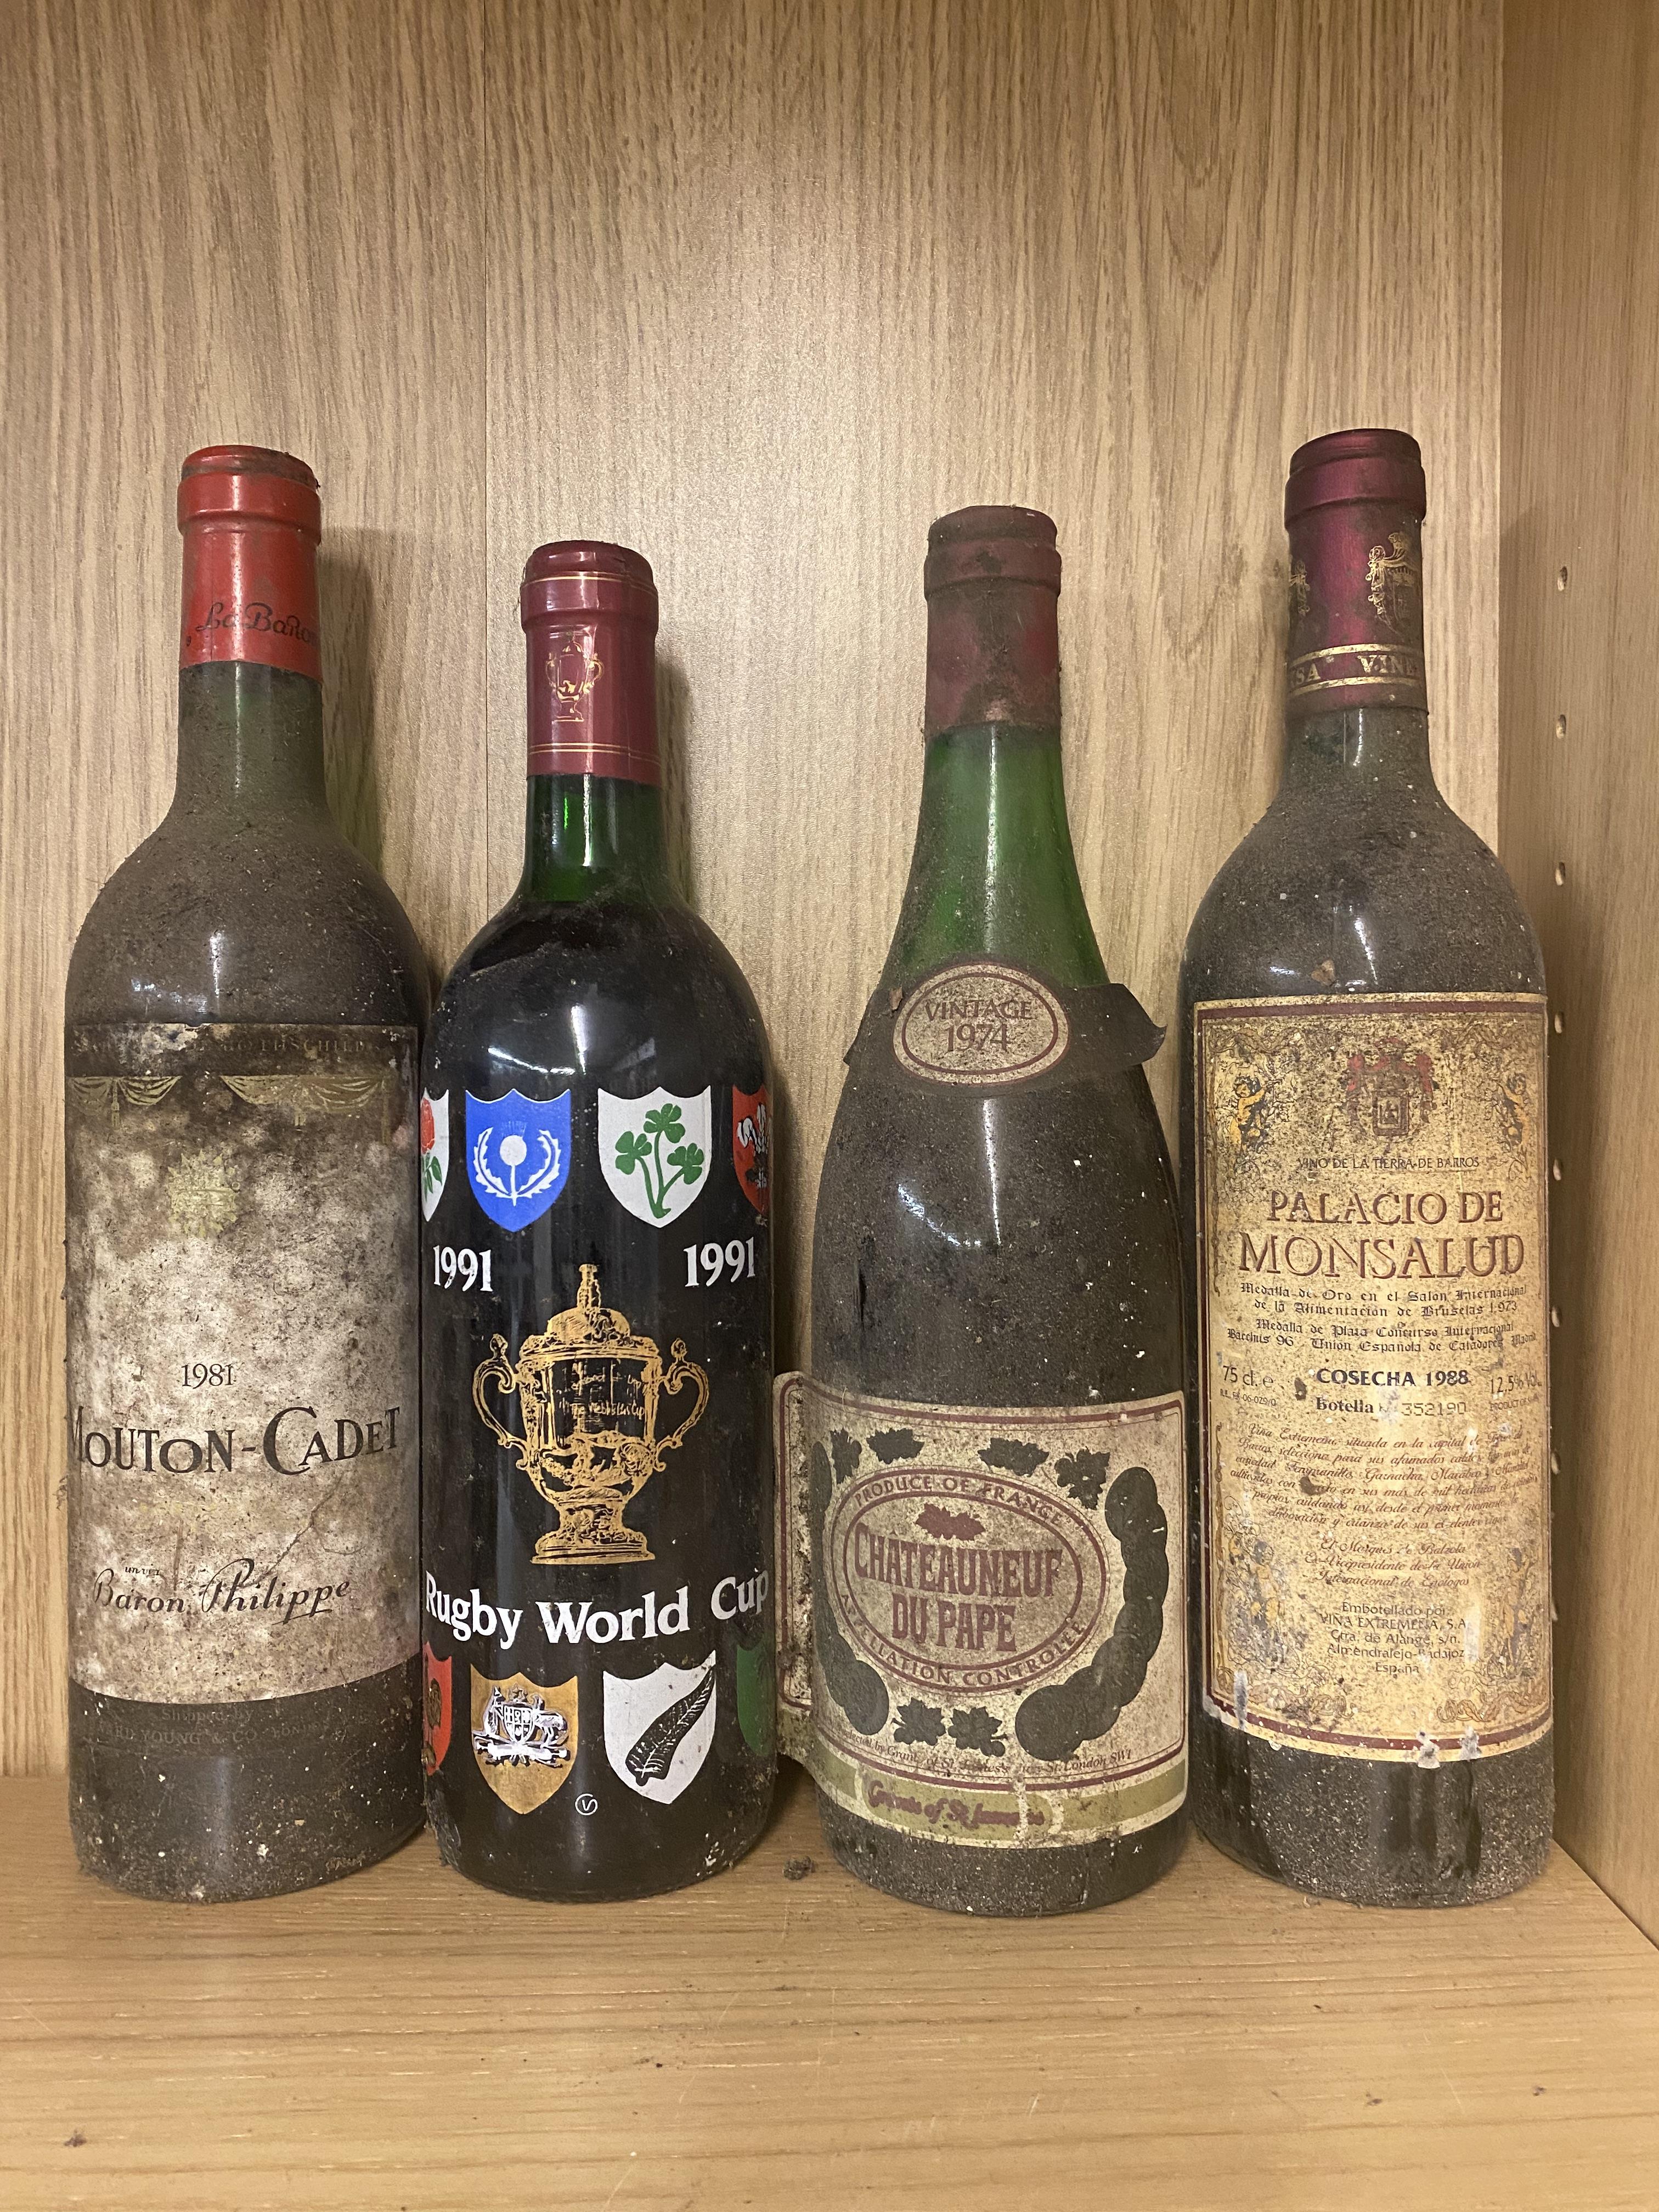 VINTAGE TAYLORS PORT AND VARIOUS BOTTLES OF MAINLY RED WINES - Image 3 of 5